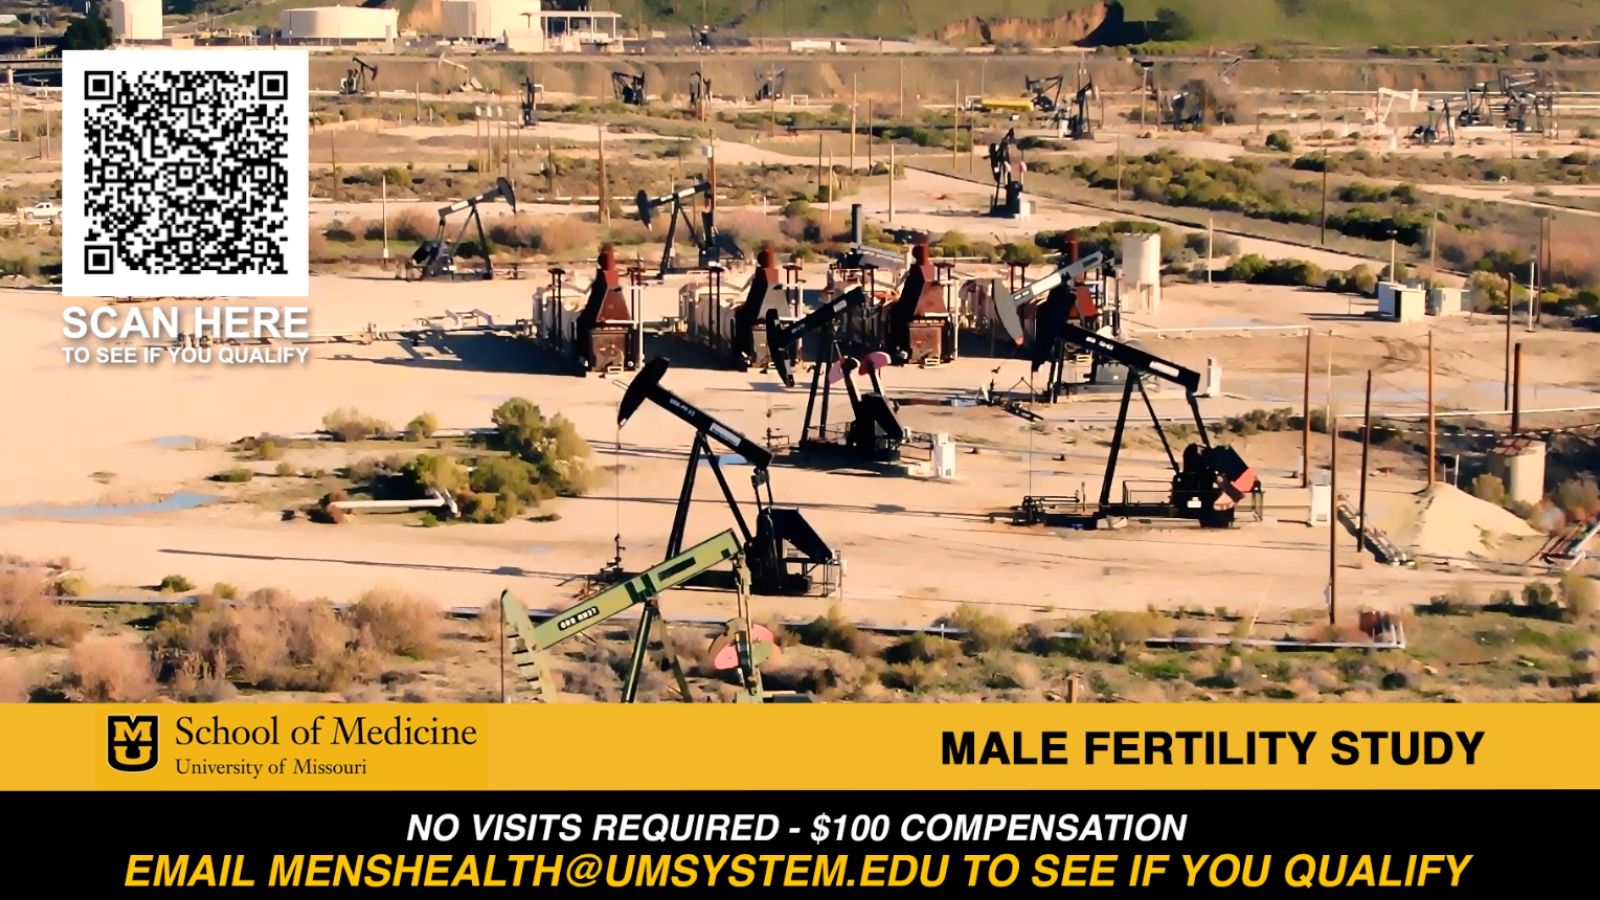 Research study to understand the effect of fracking on male fertility in Colorado.